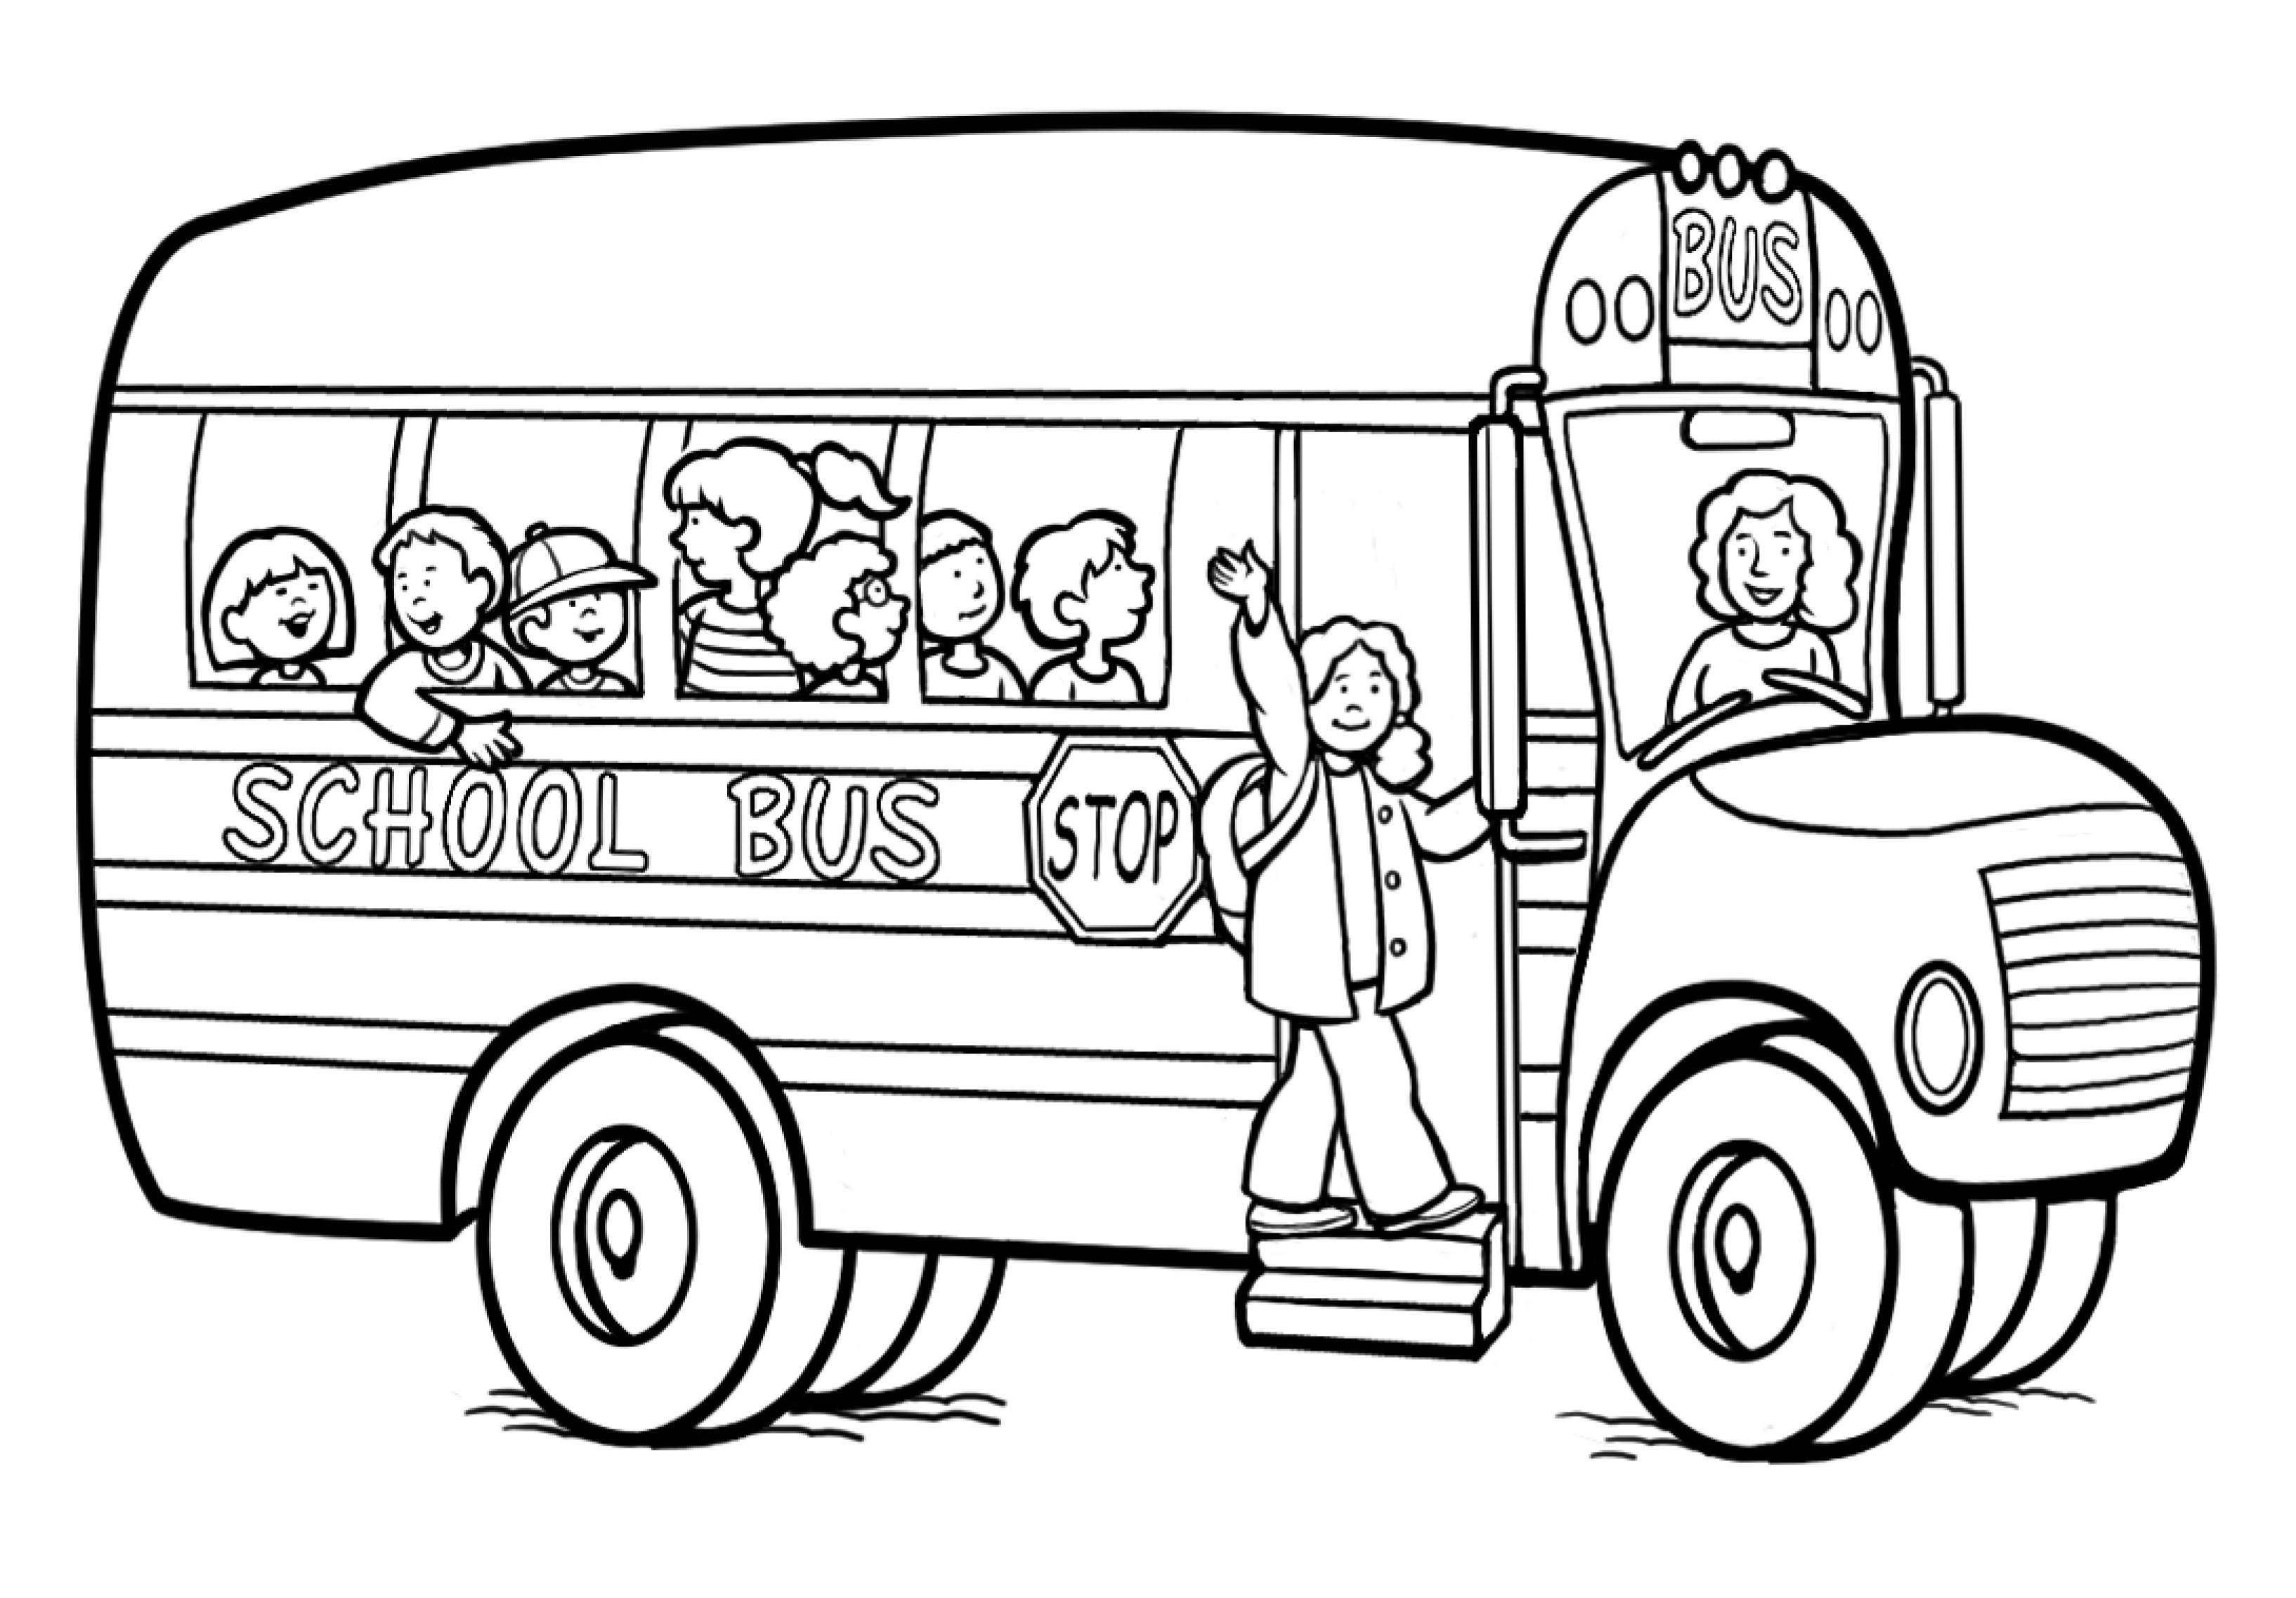 coloring picture of a bus top 10 free printable school bus coloring pages online of picture bus a coloring 